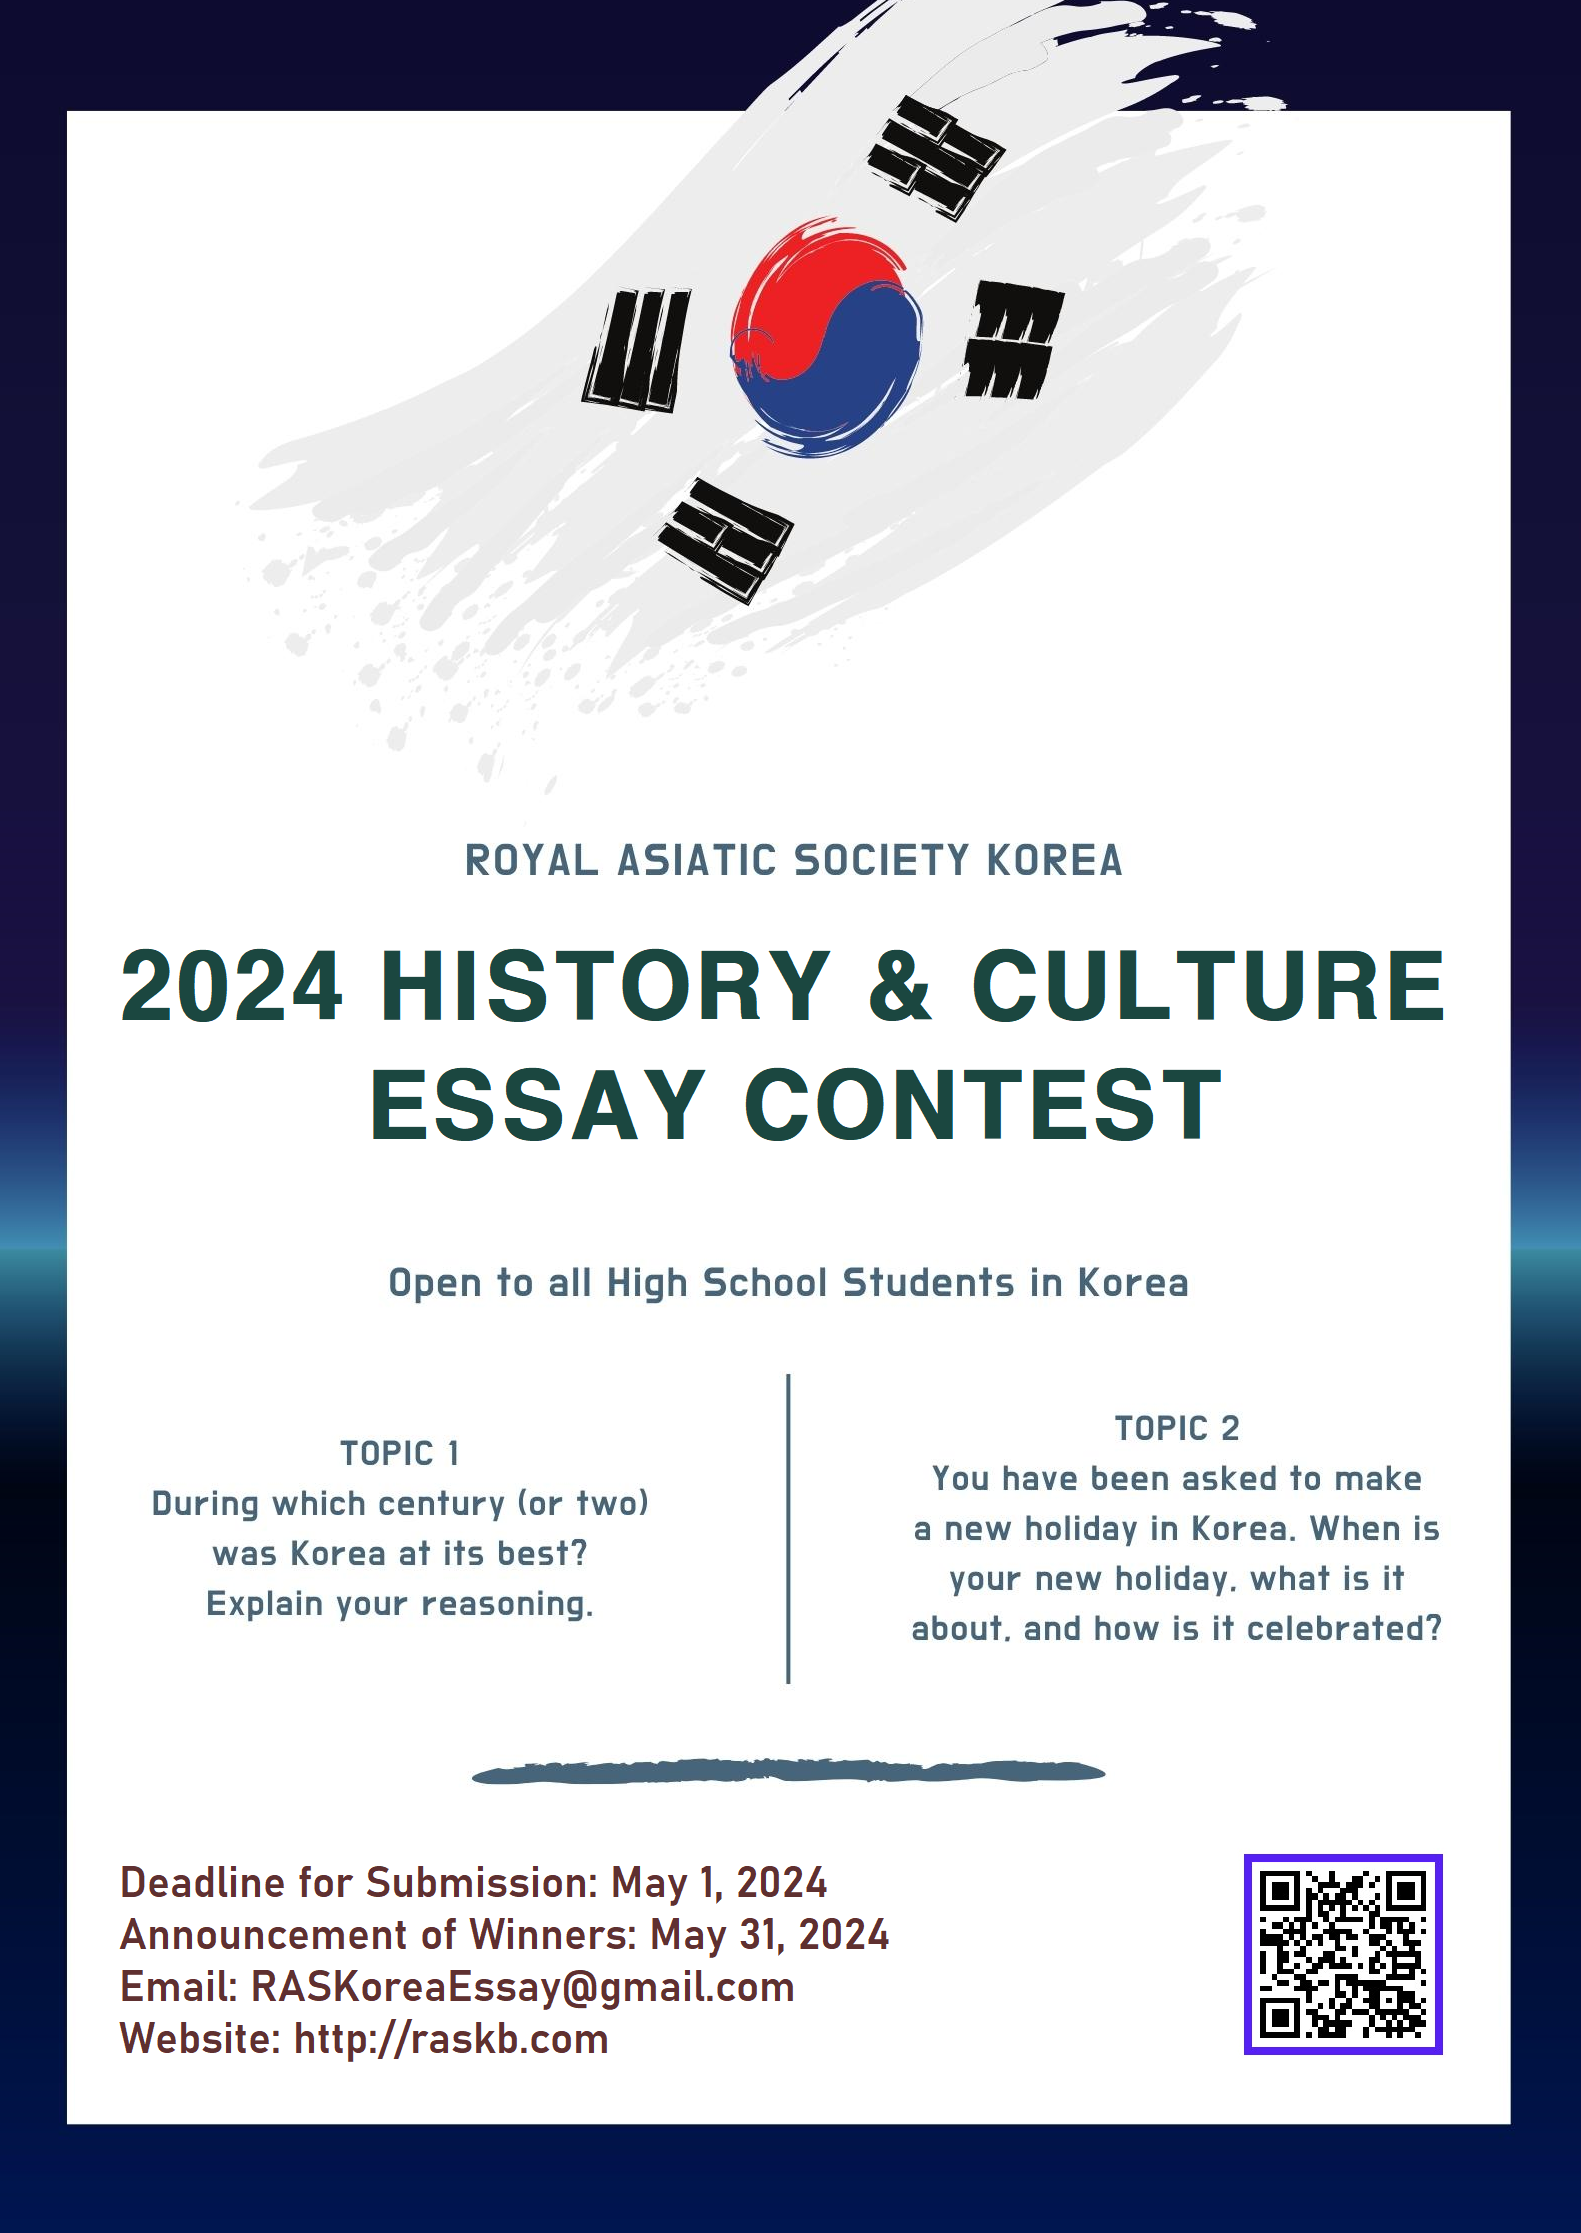 [ANNOUNCEMENT] 5th Annual History & Culture English Essay Contest for High School Students